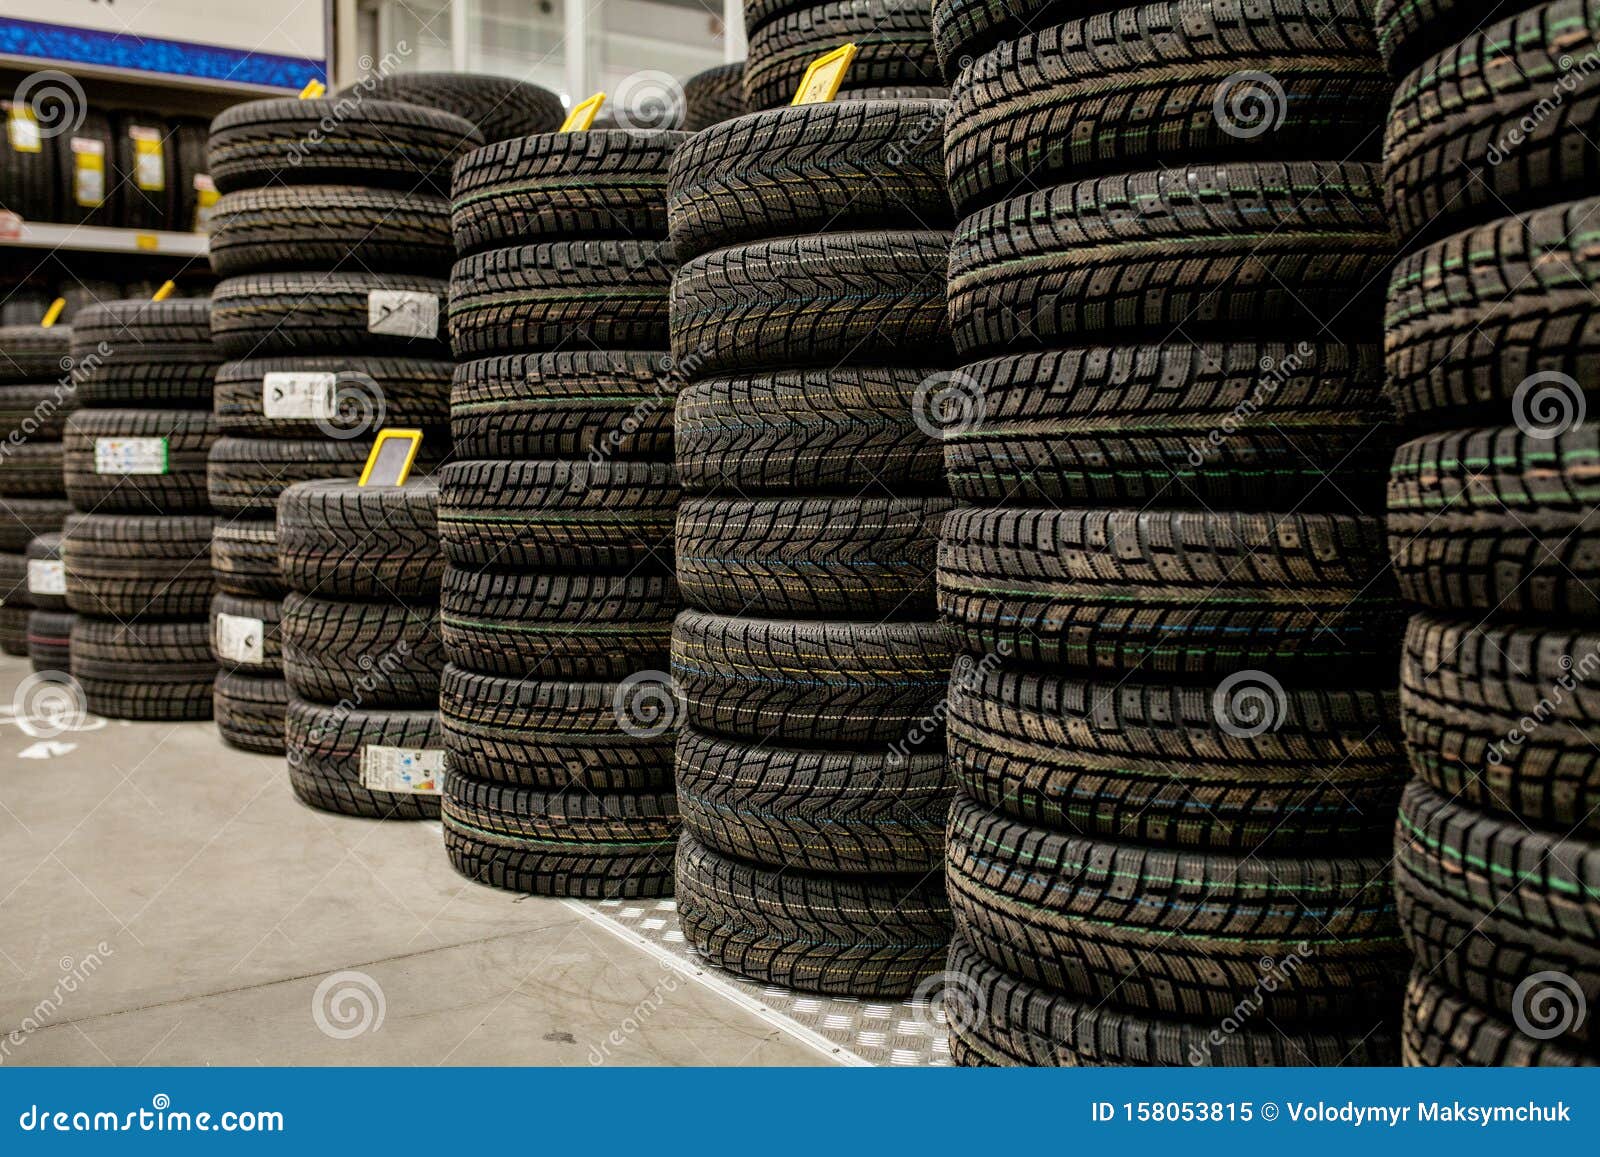 tires and wheels warehouse